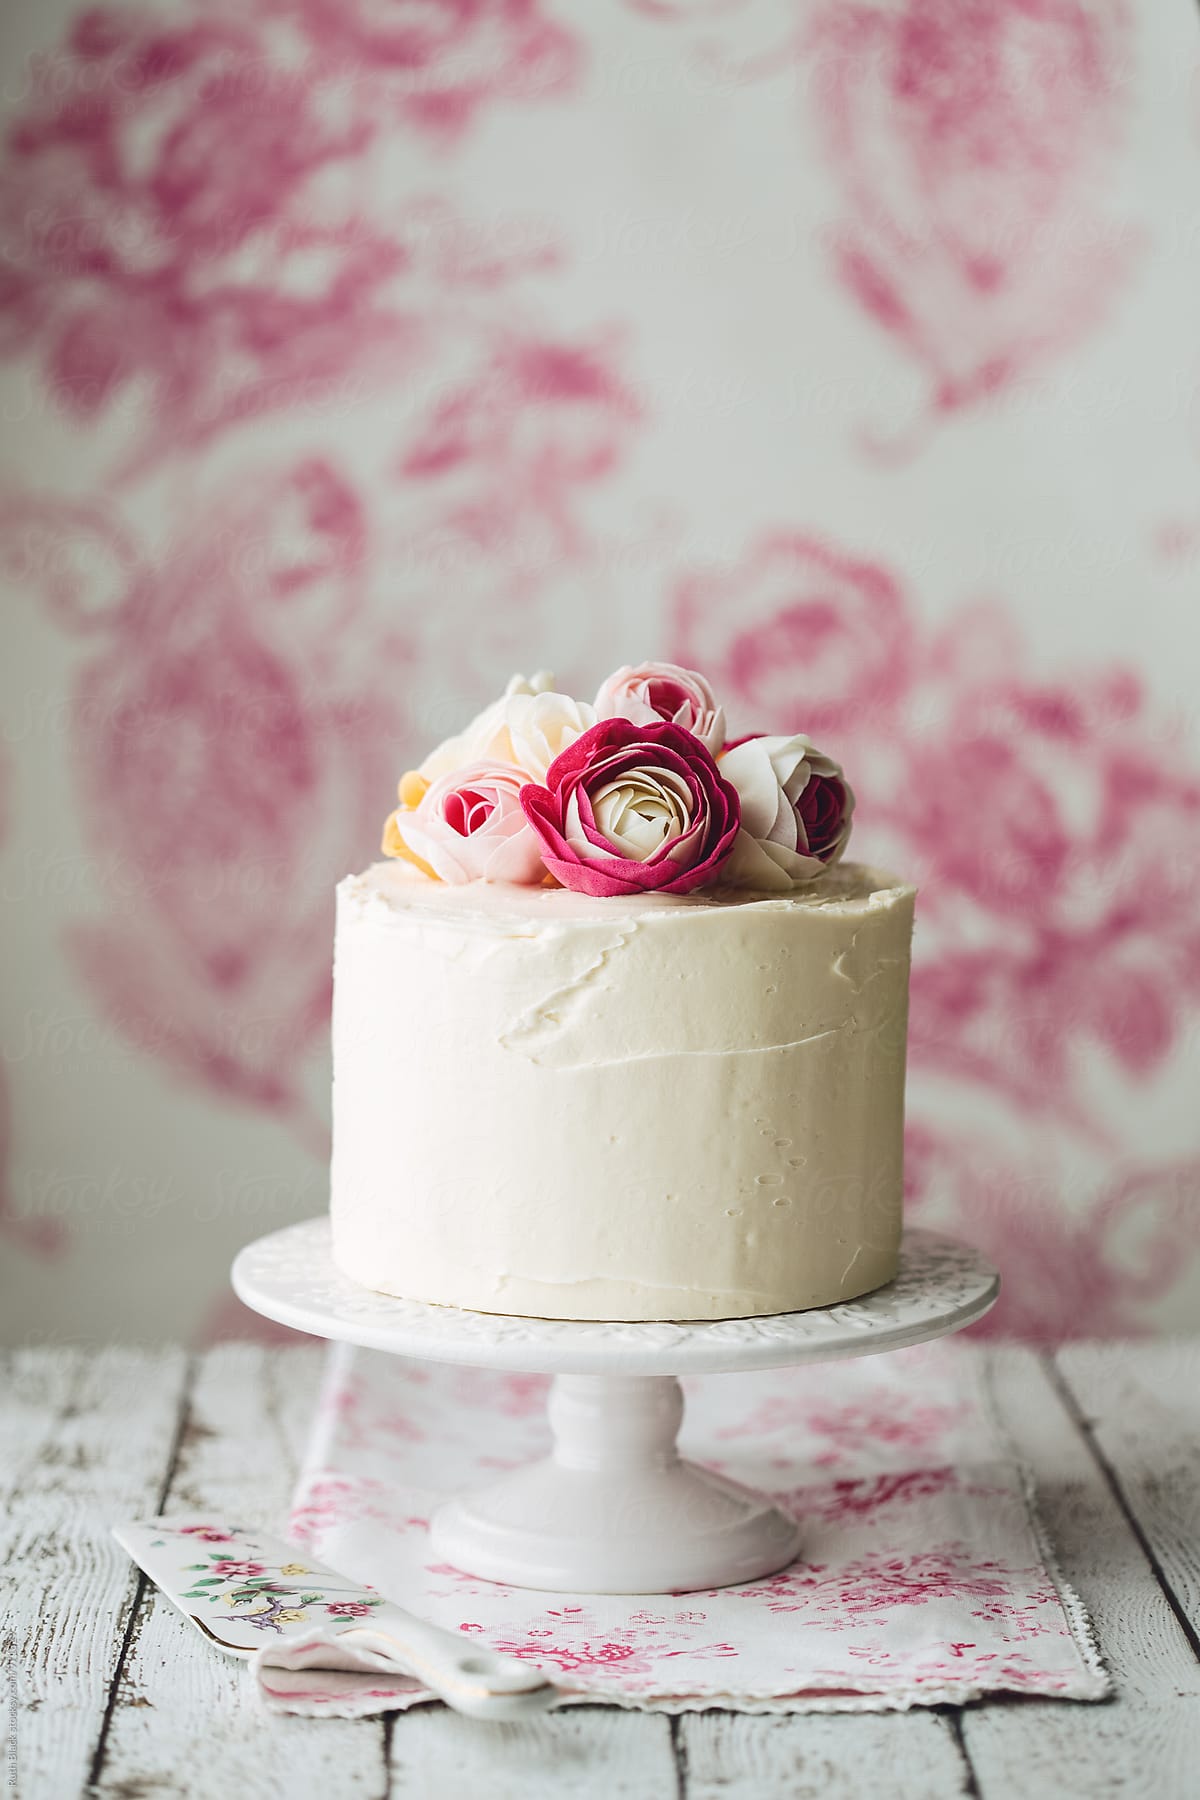 Vintage style cake with roses